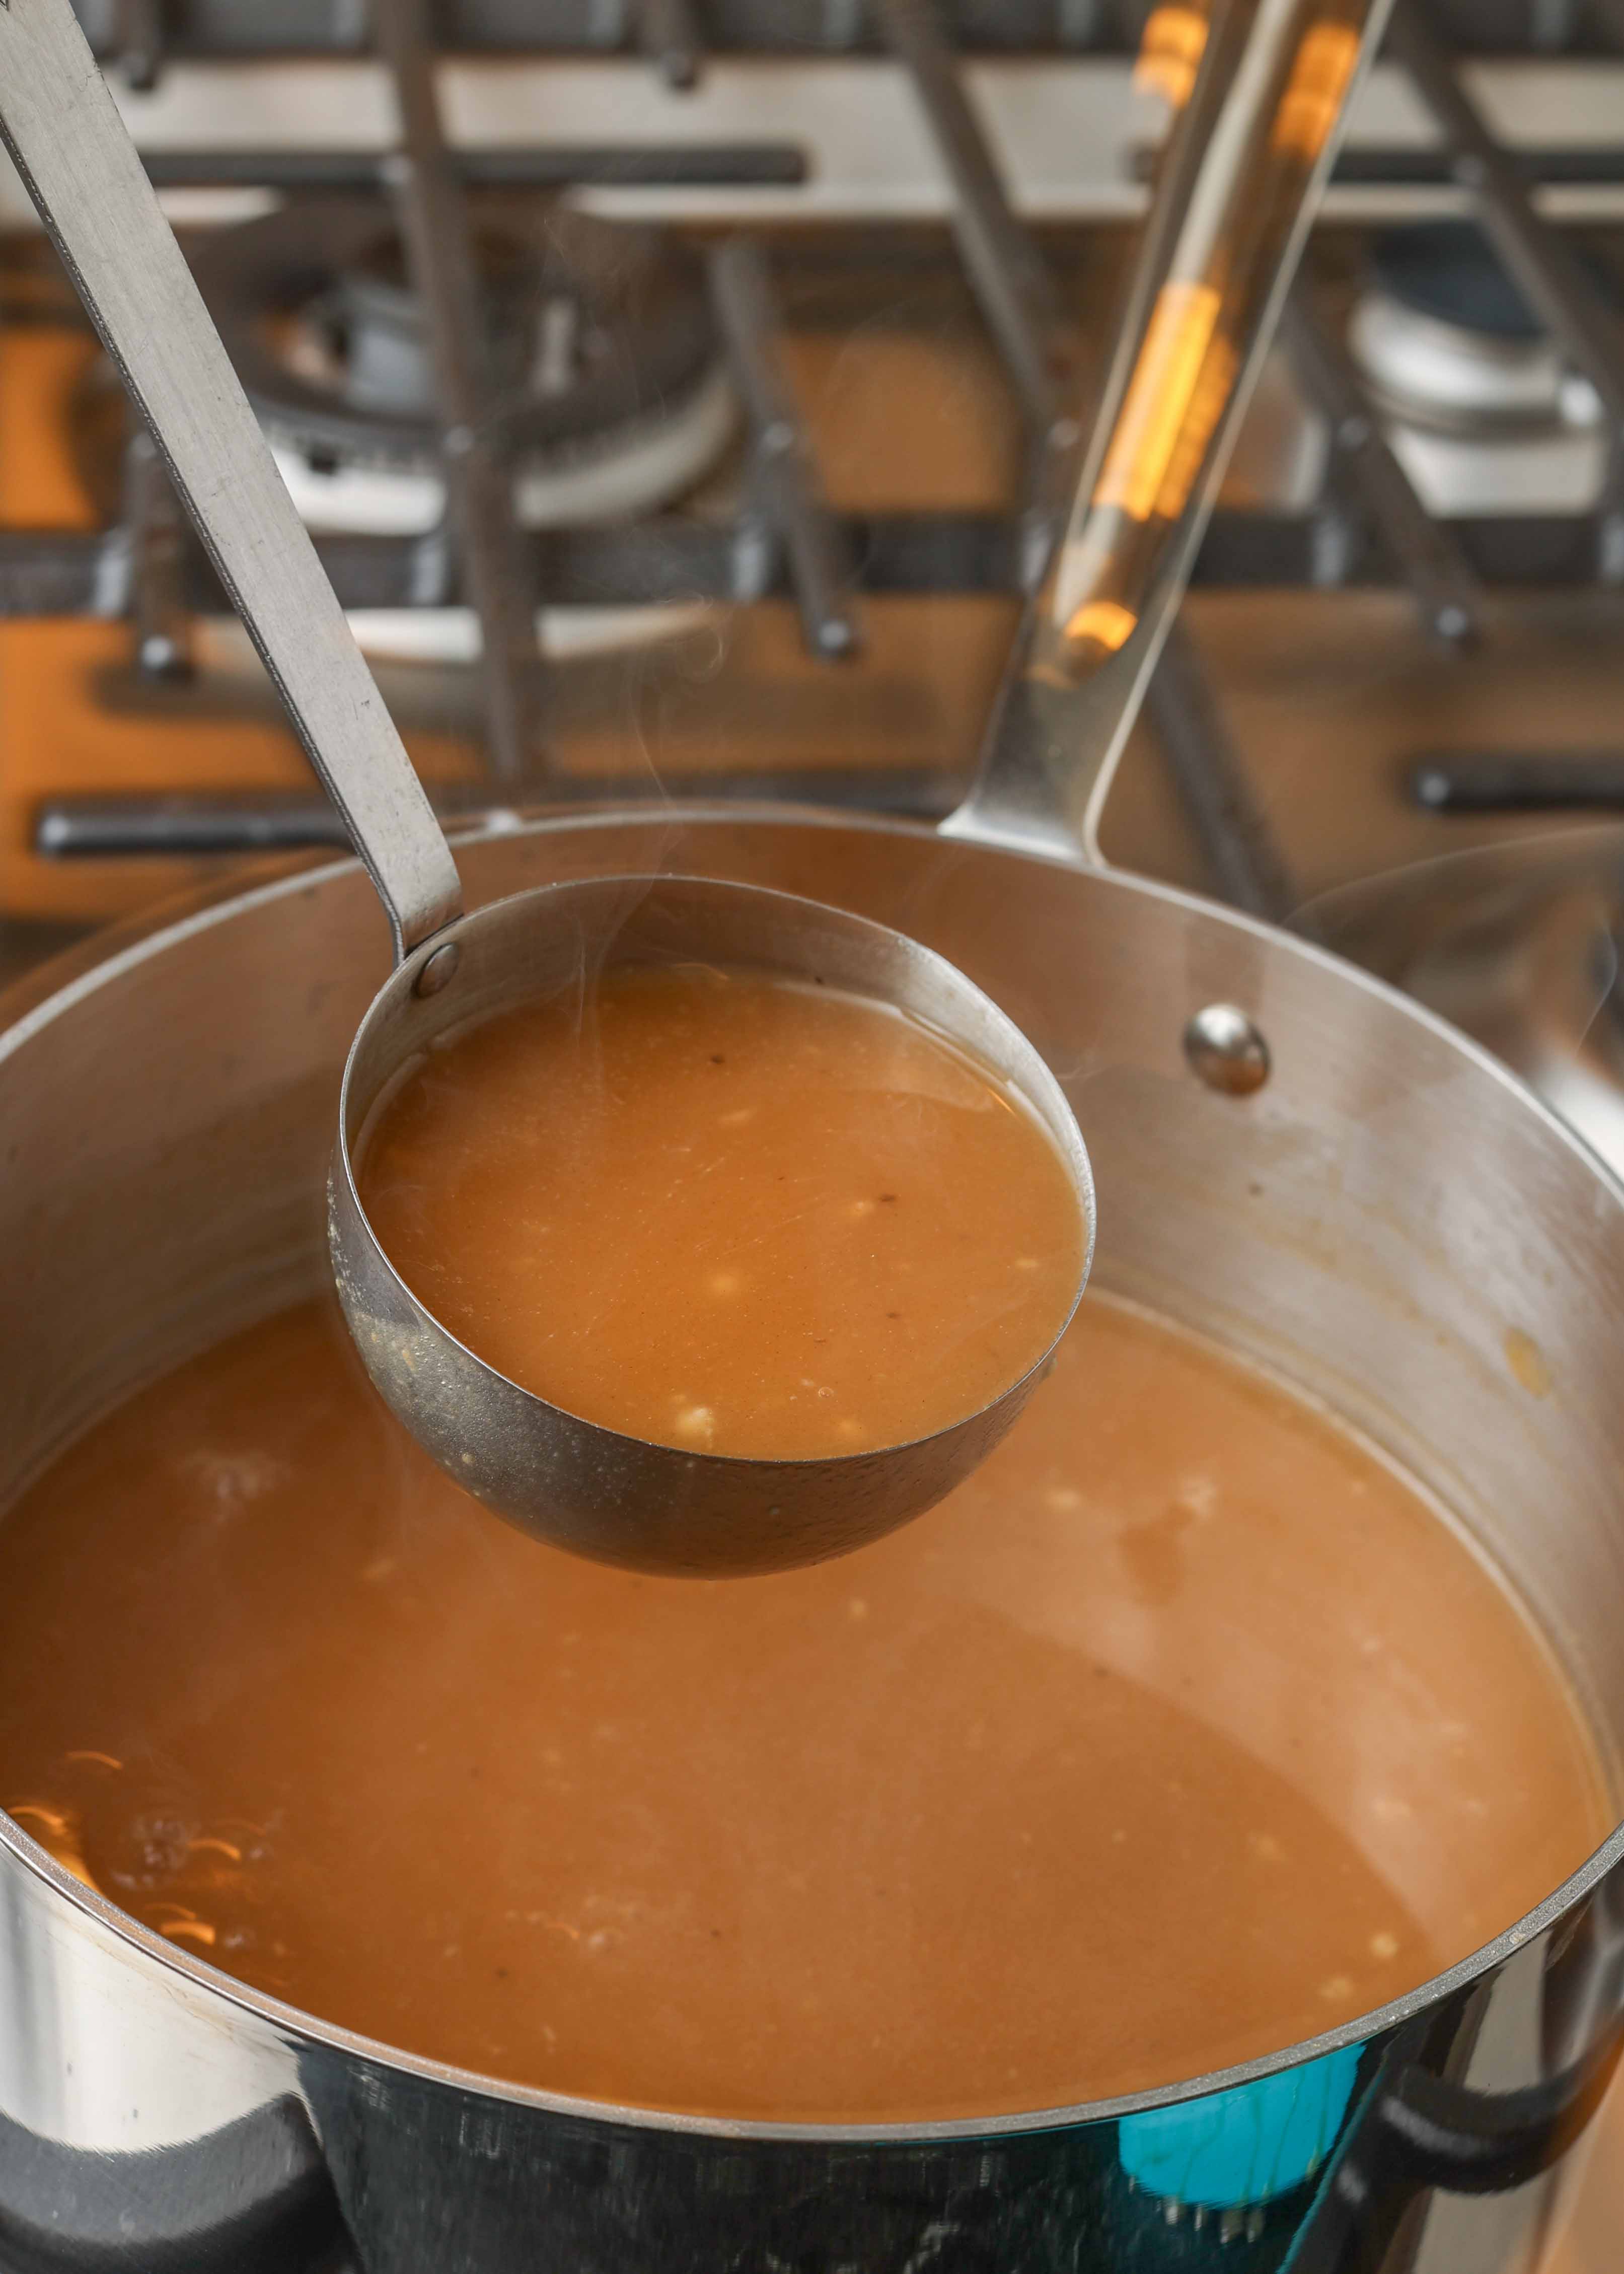 Easy Onion Gravy with Ale - Homemade gravy without granules